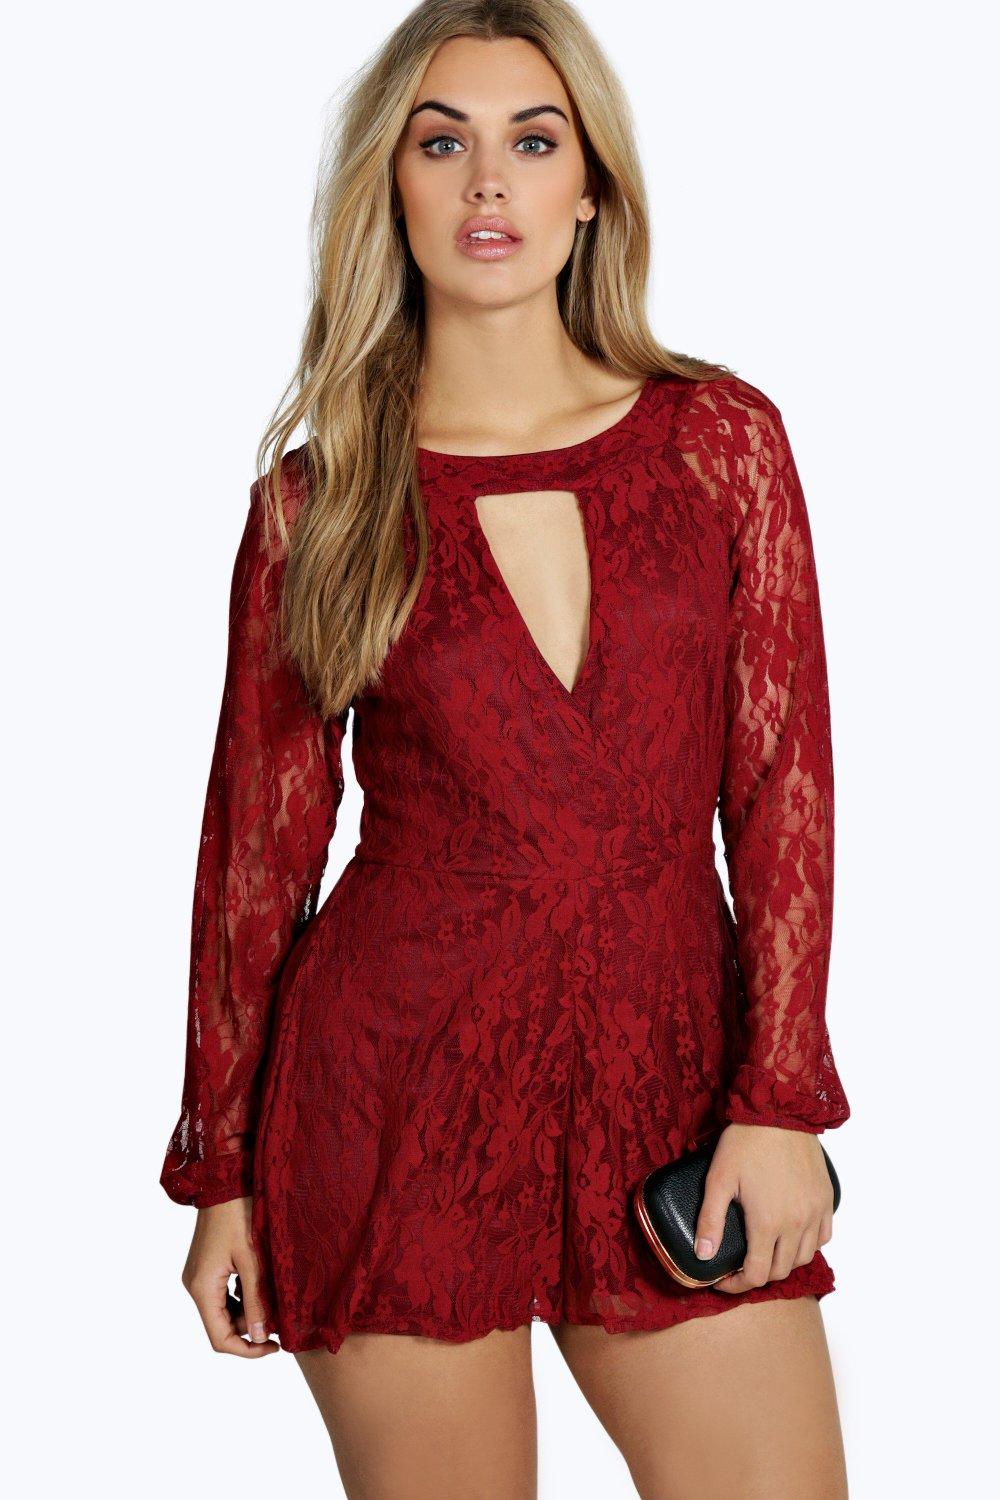 Plus Amber Lace Wrap Front Playsuit at boohoo.com